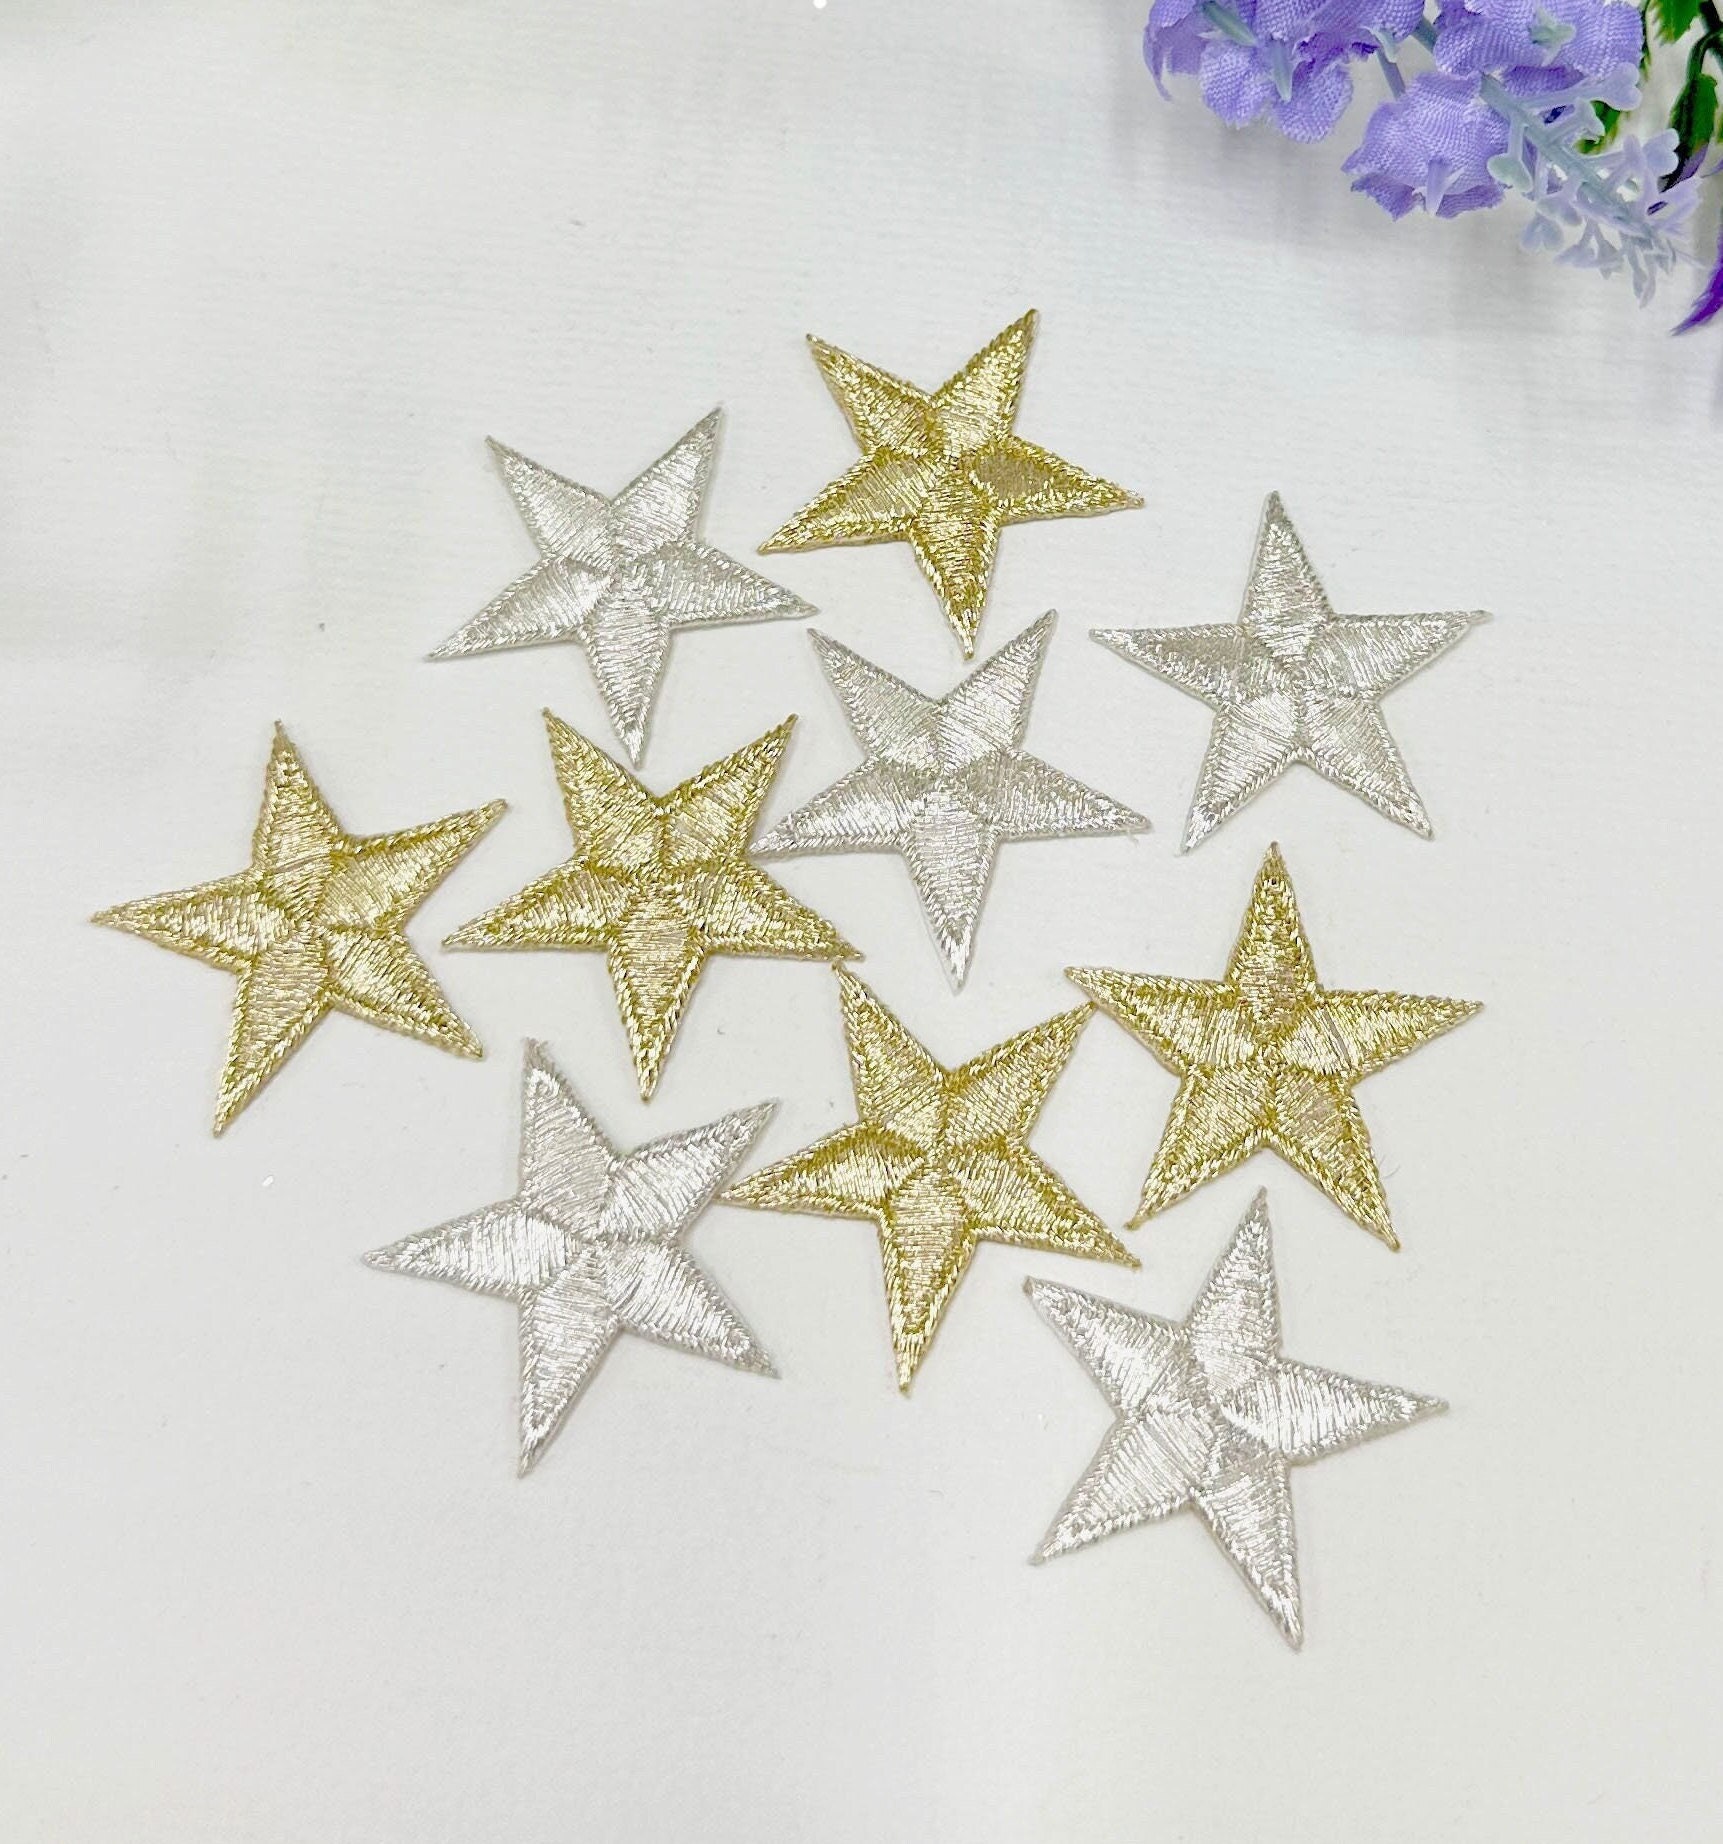 Iron on Metallic Star Patches in Gold or Silver, Small Embroidered Stars  for Christmas and Sewing 3cm Sold Individually 